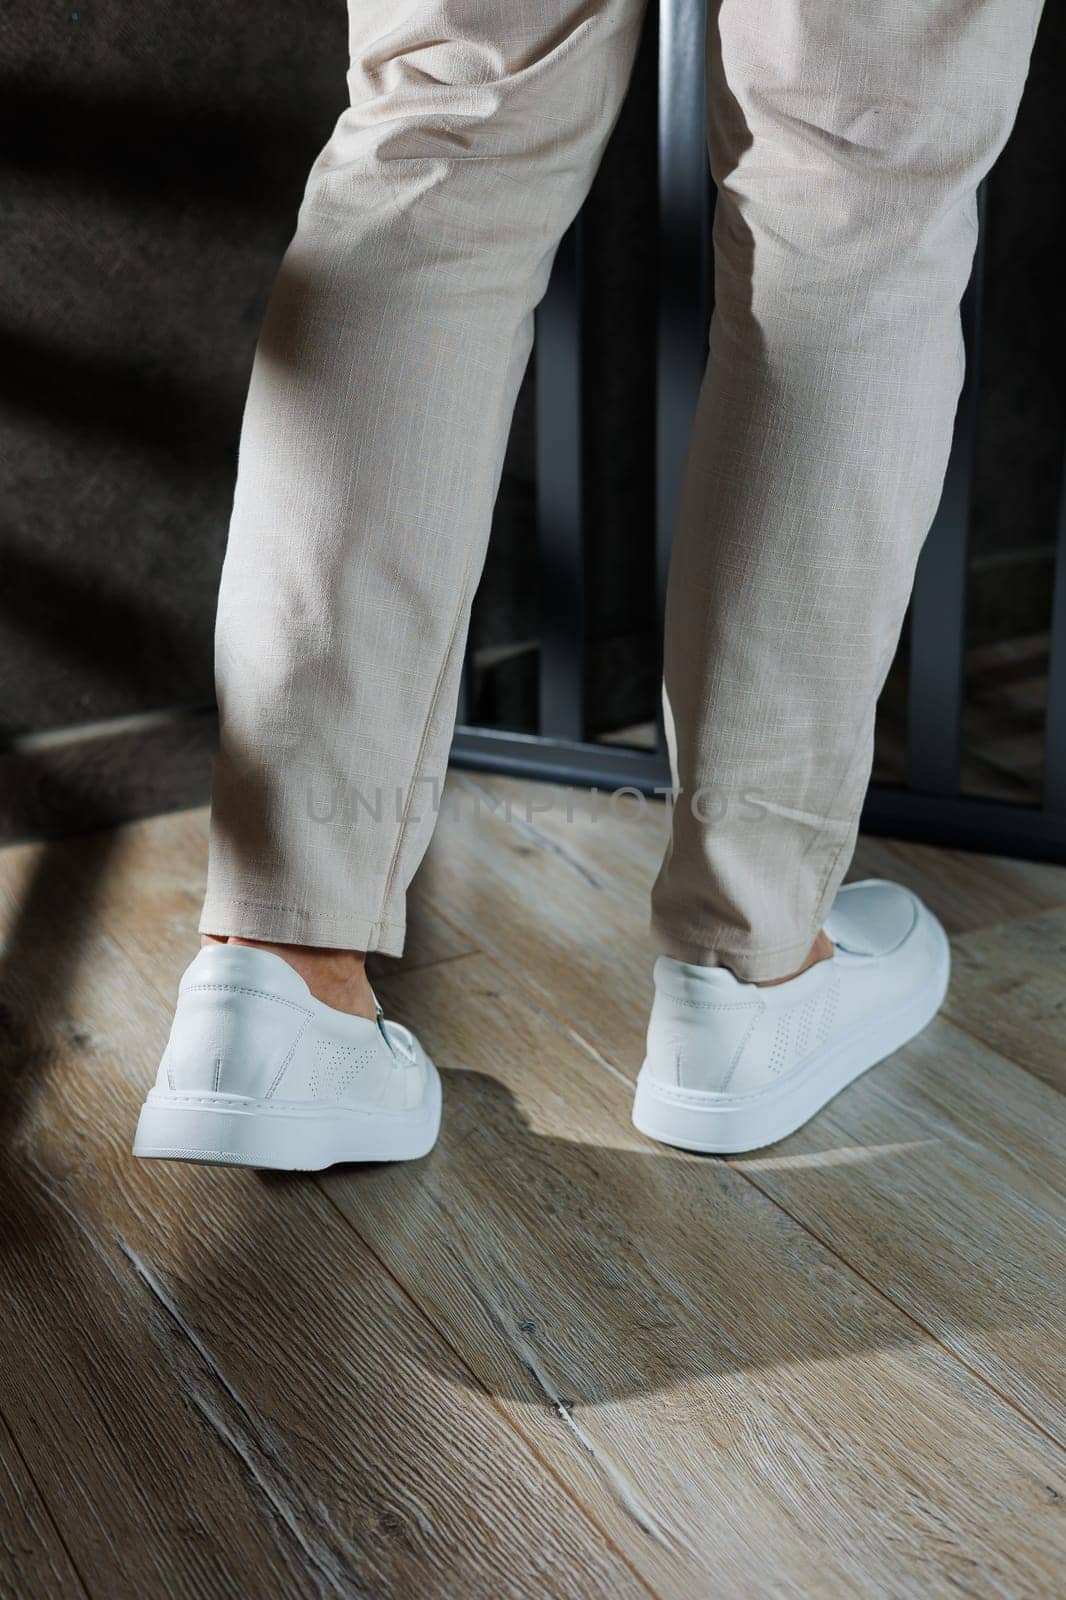 Close-up of male feet in white casual shoes. Fashionable young man standing in leather stylish white moccasins in fashionable trousers. Seasonal summer men's shoes. Casual street style.